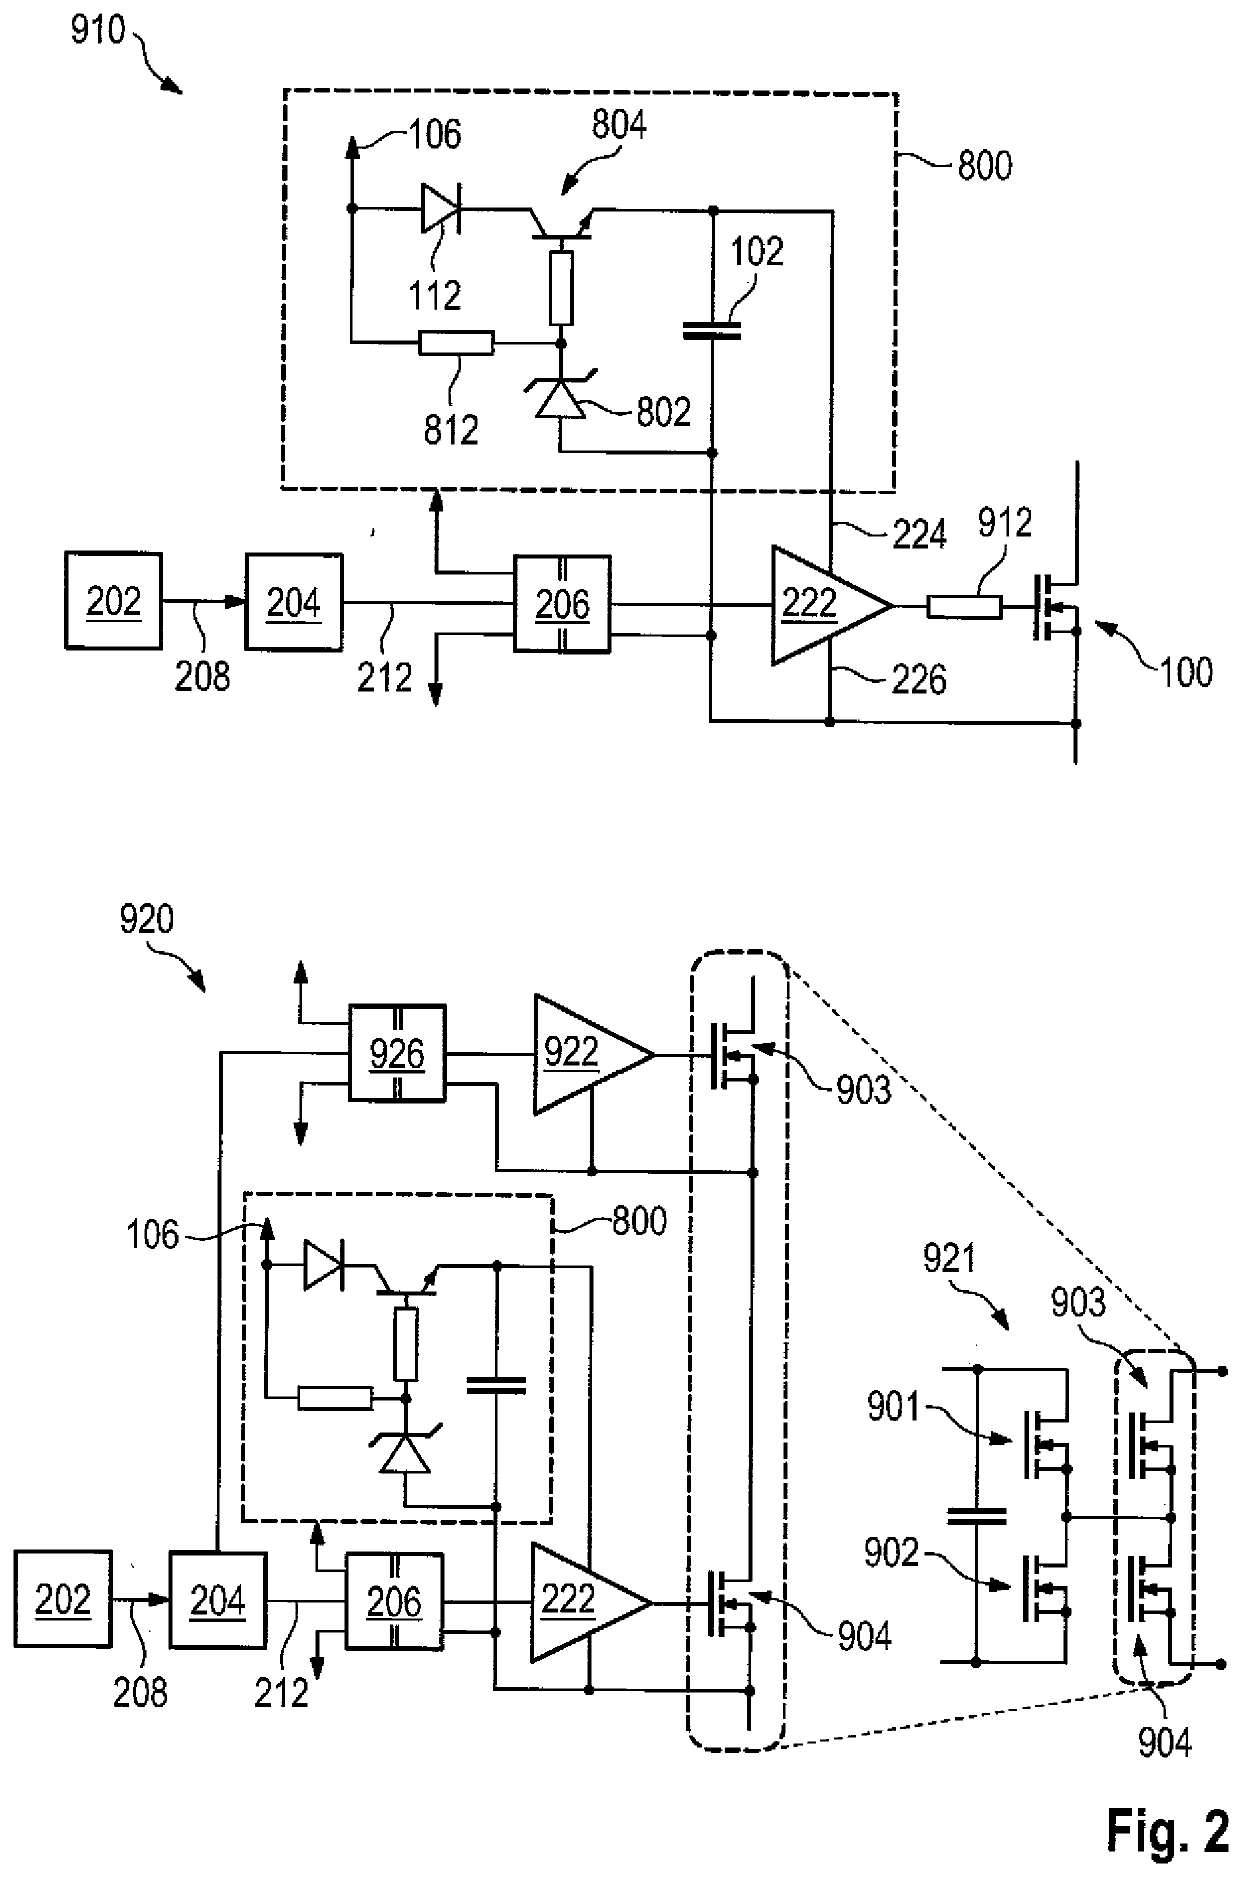 Flexible bootstrapping for power electronics circuits